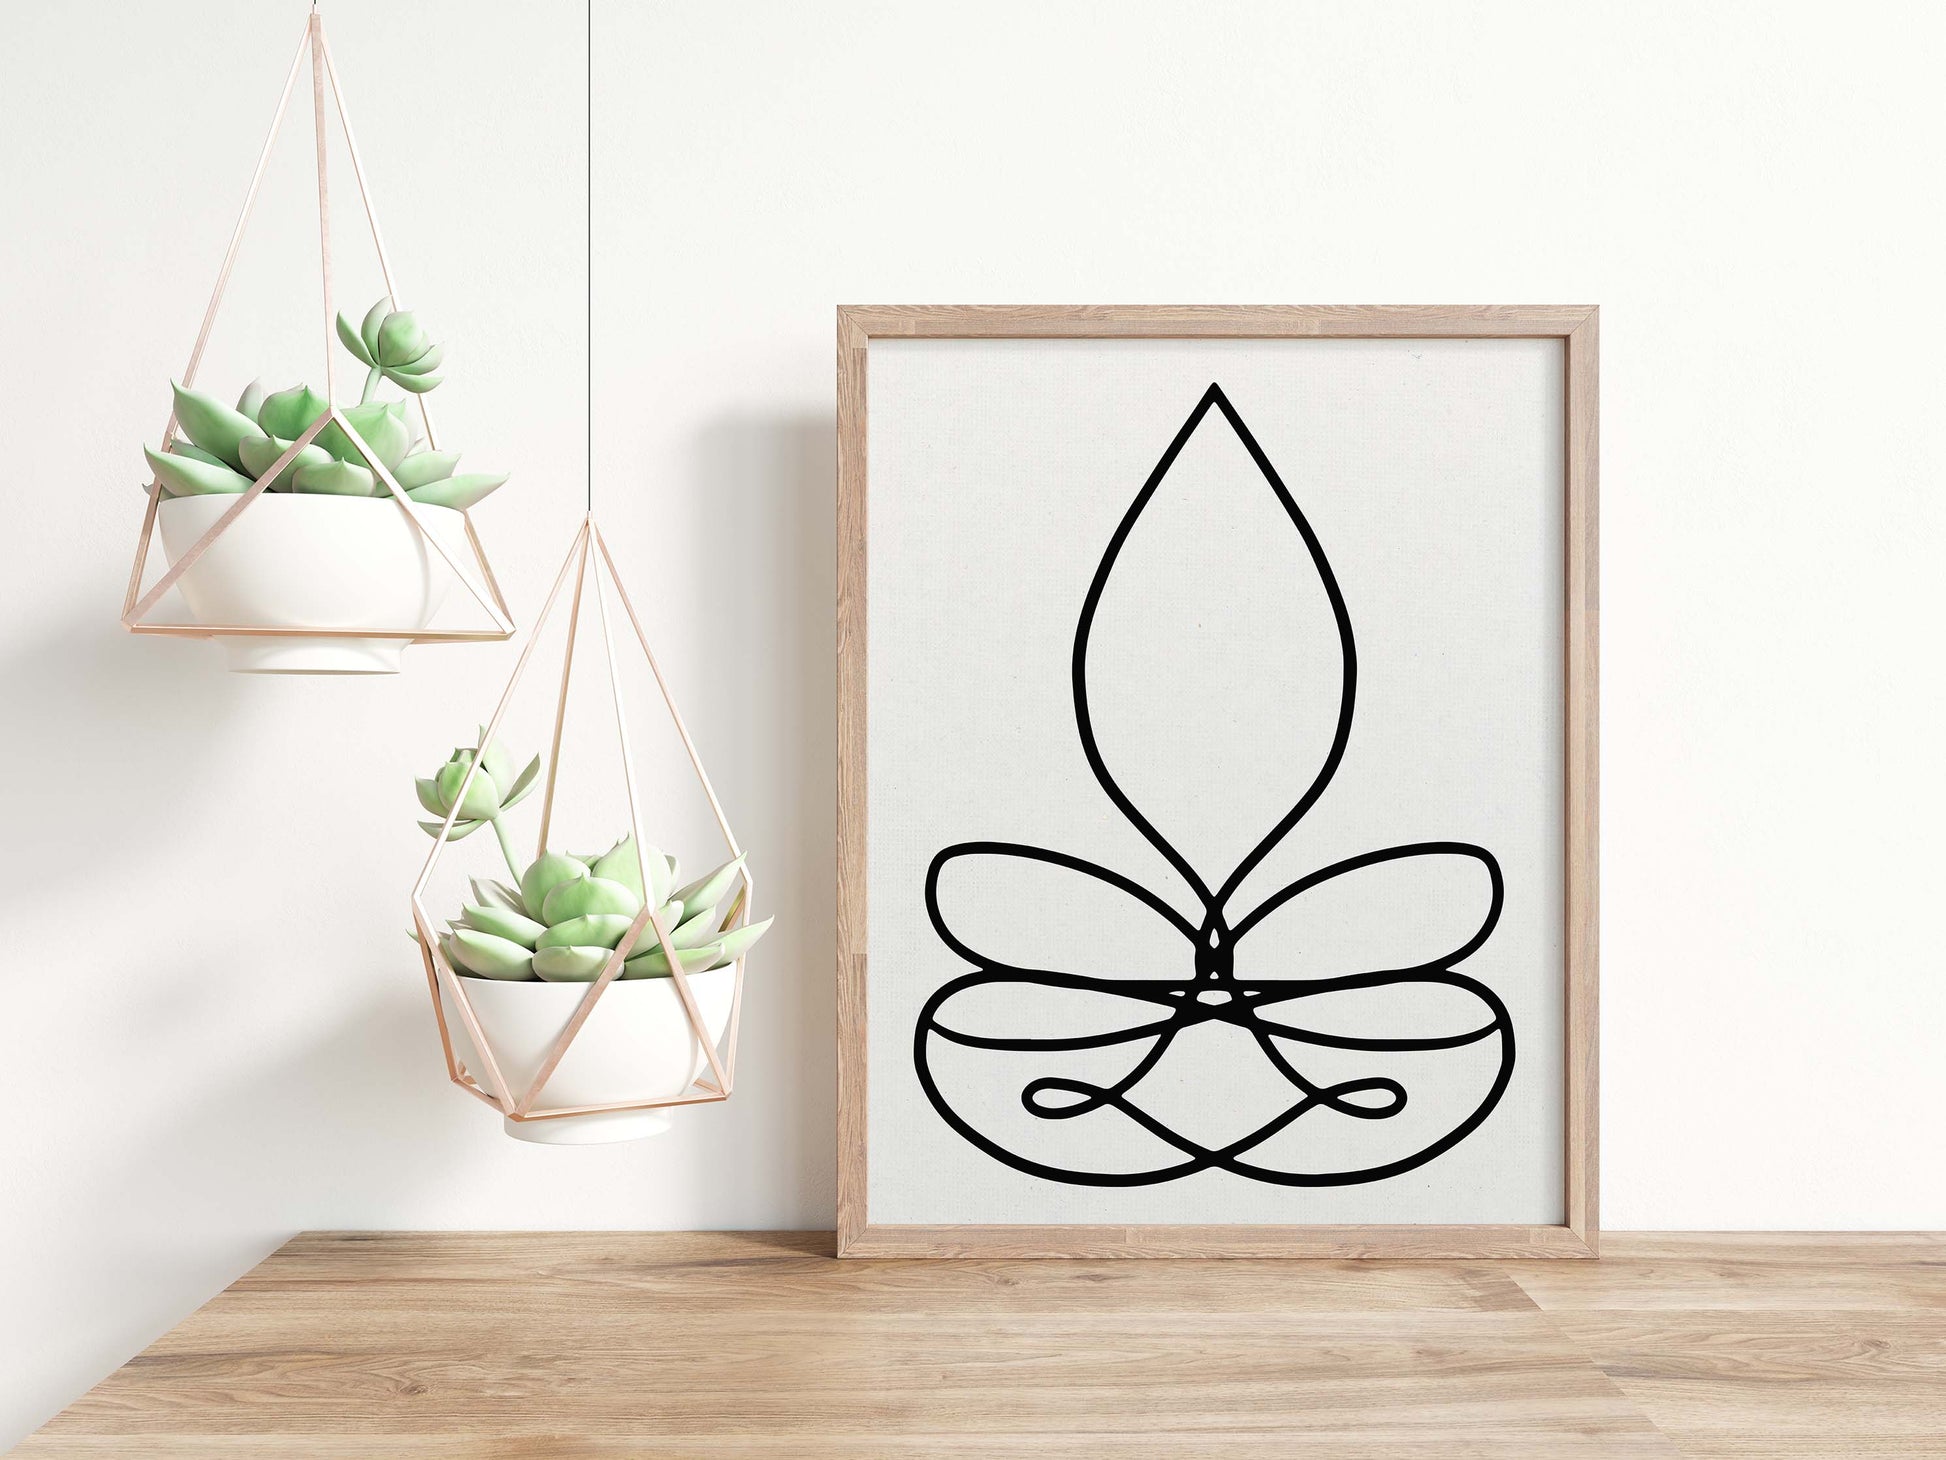 A line drawing of meditation pose in black & white Poster in beige frame